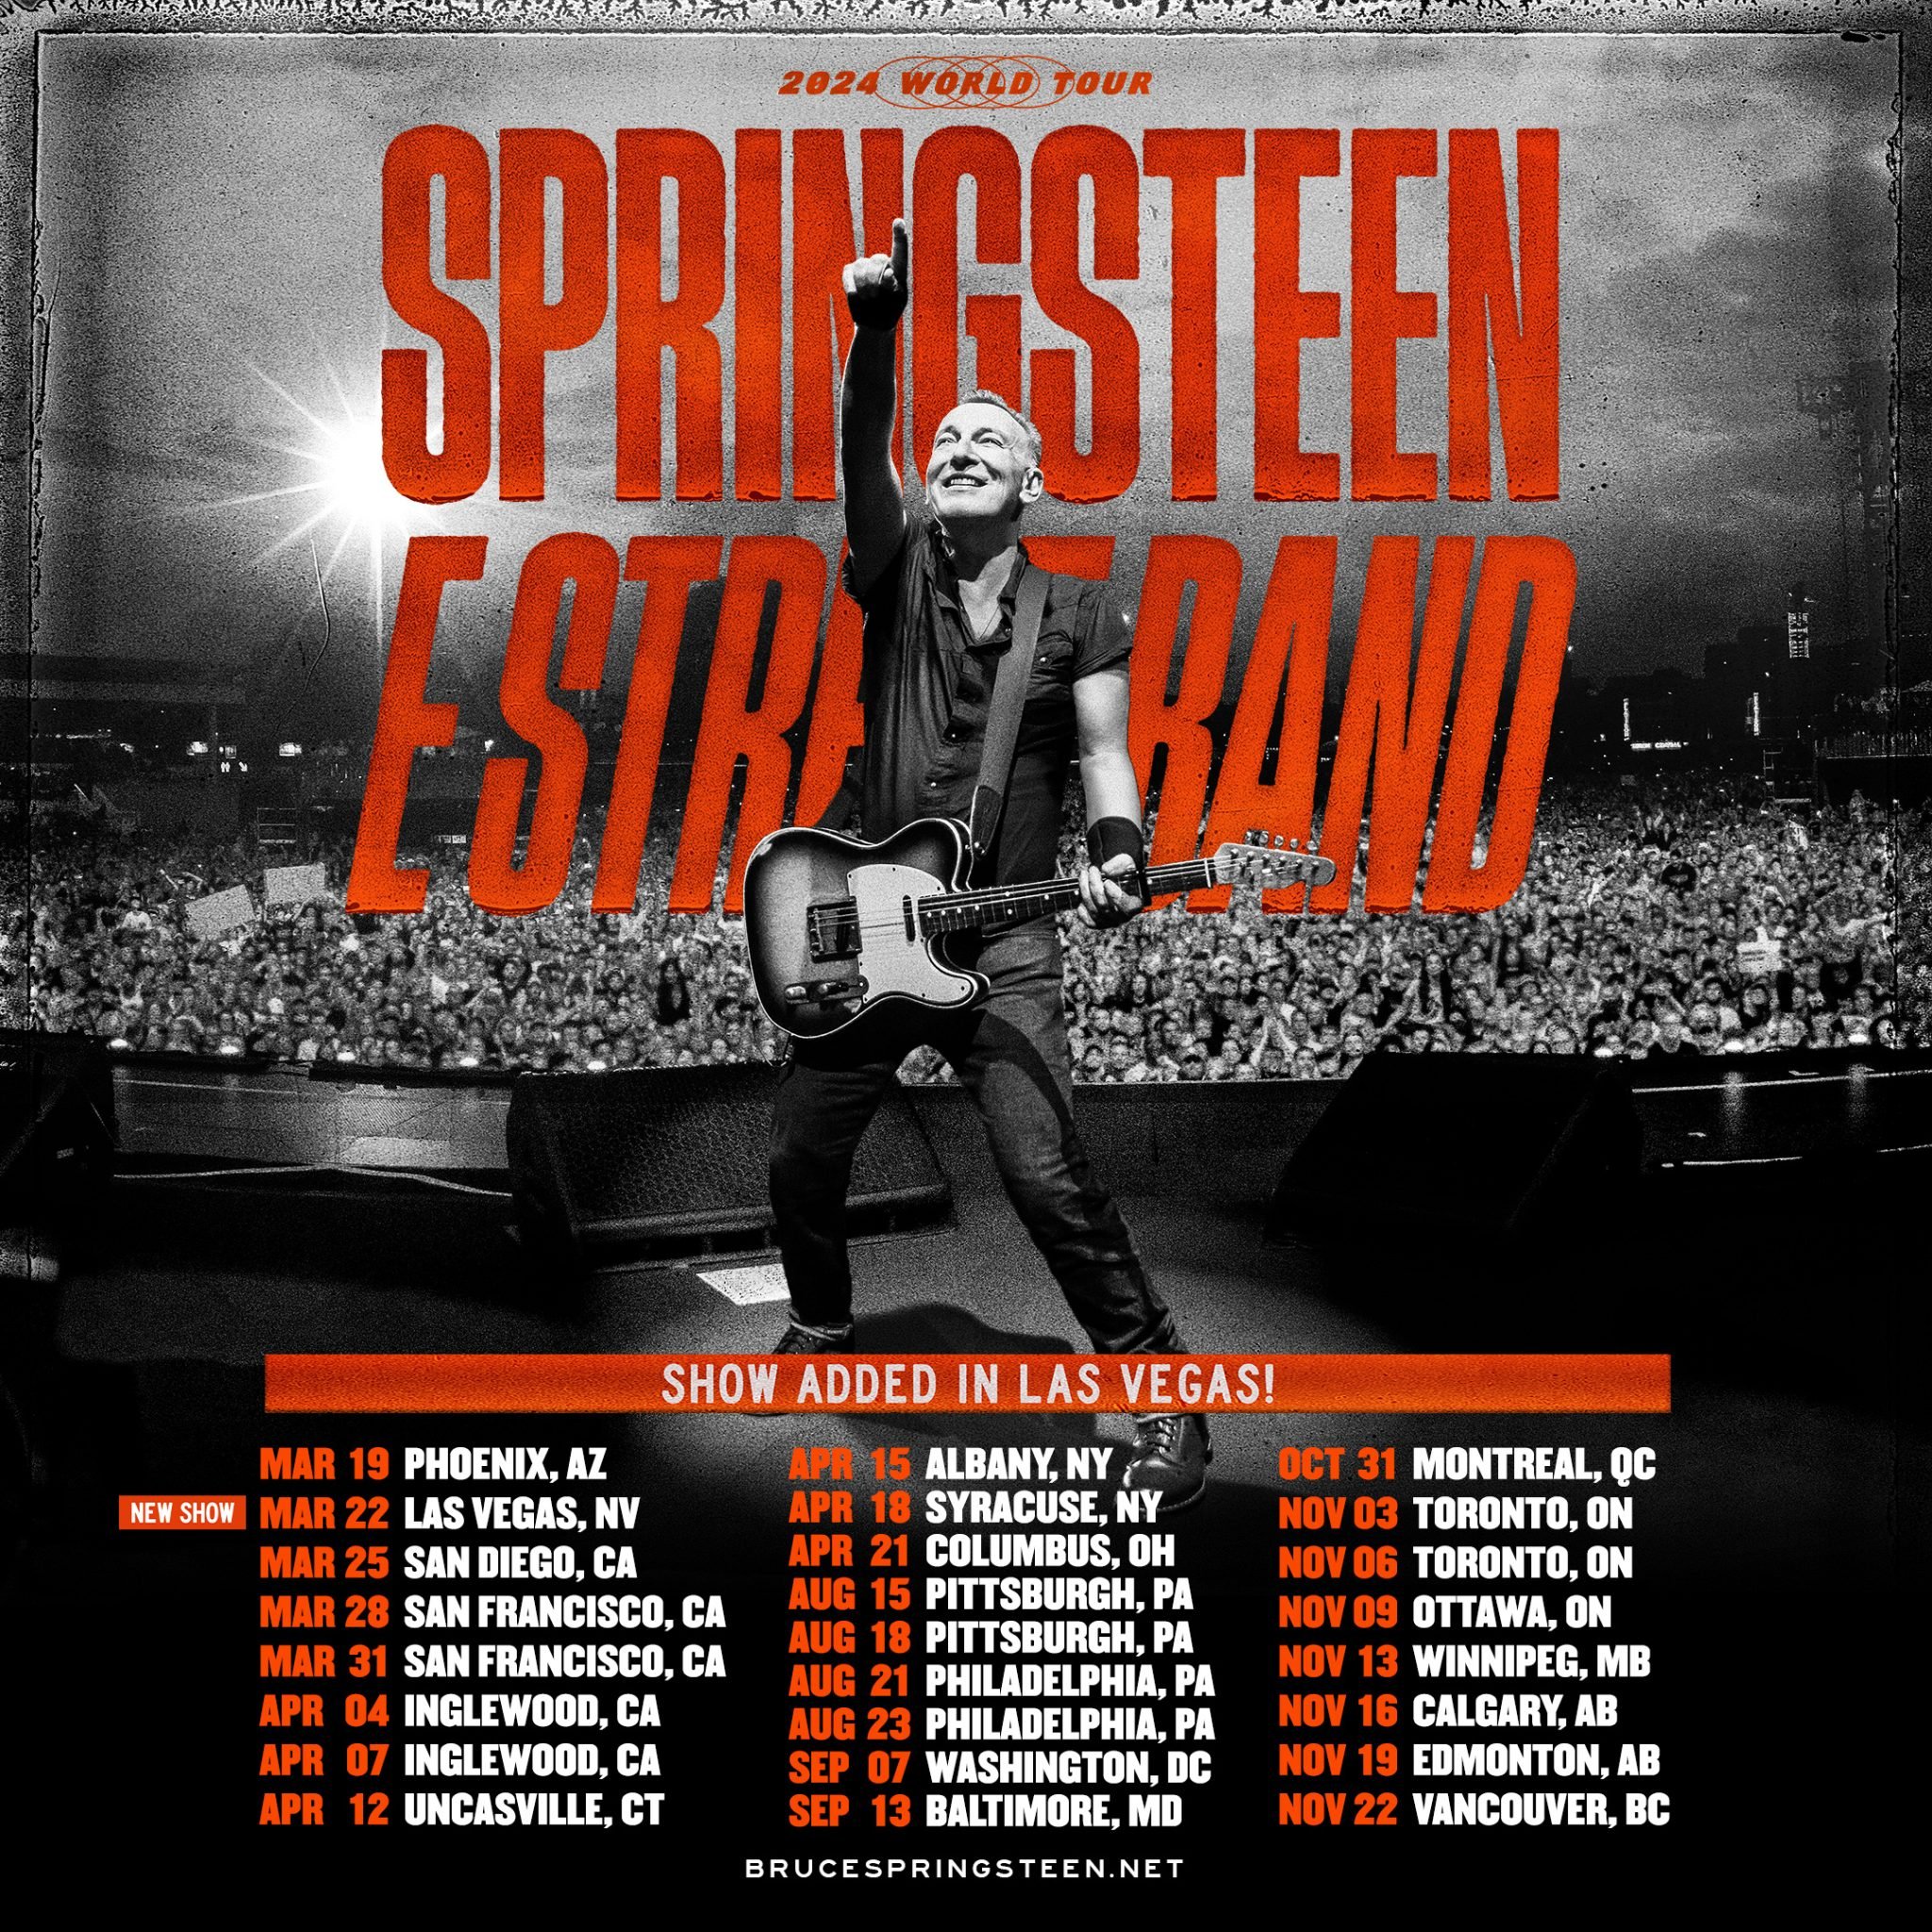 Bruce Springsteen Tickets Toronto: New Dates for 2024 Tour